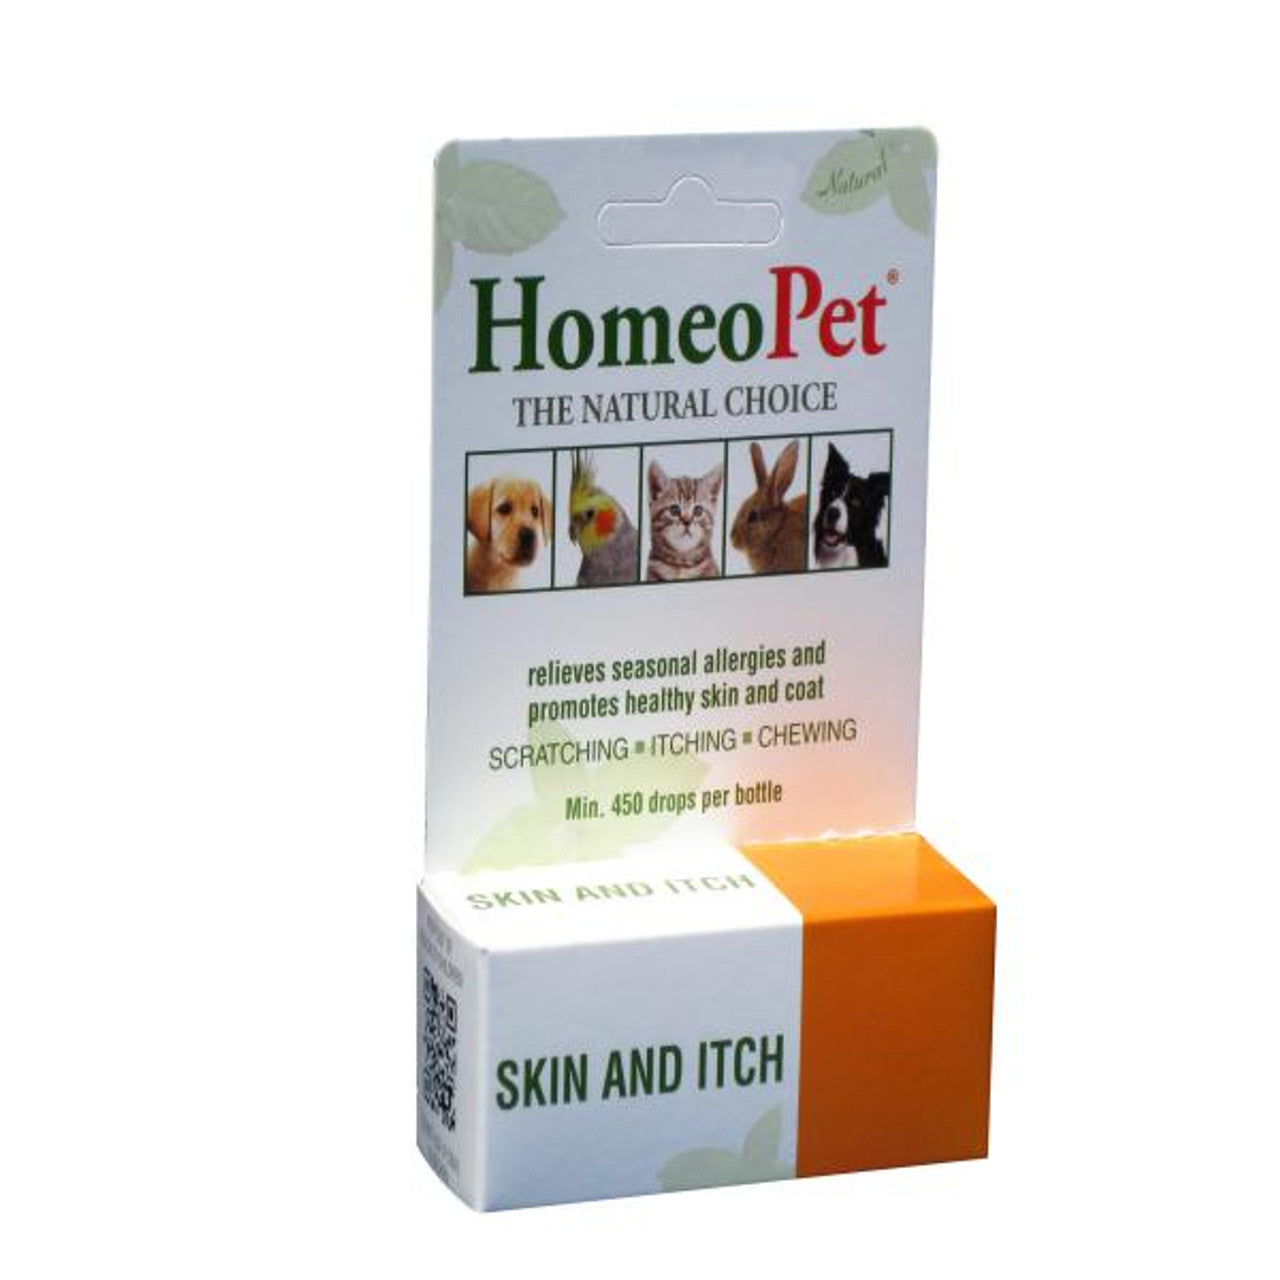 HomeoPet Skin and Itch Relief 15ml